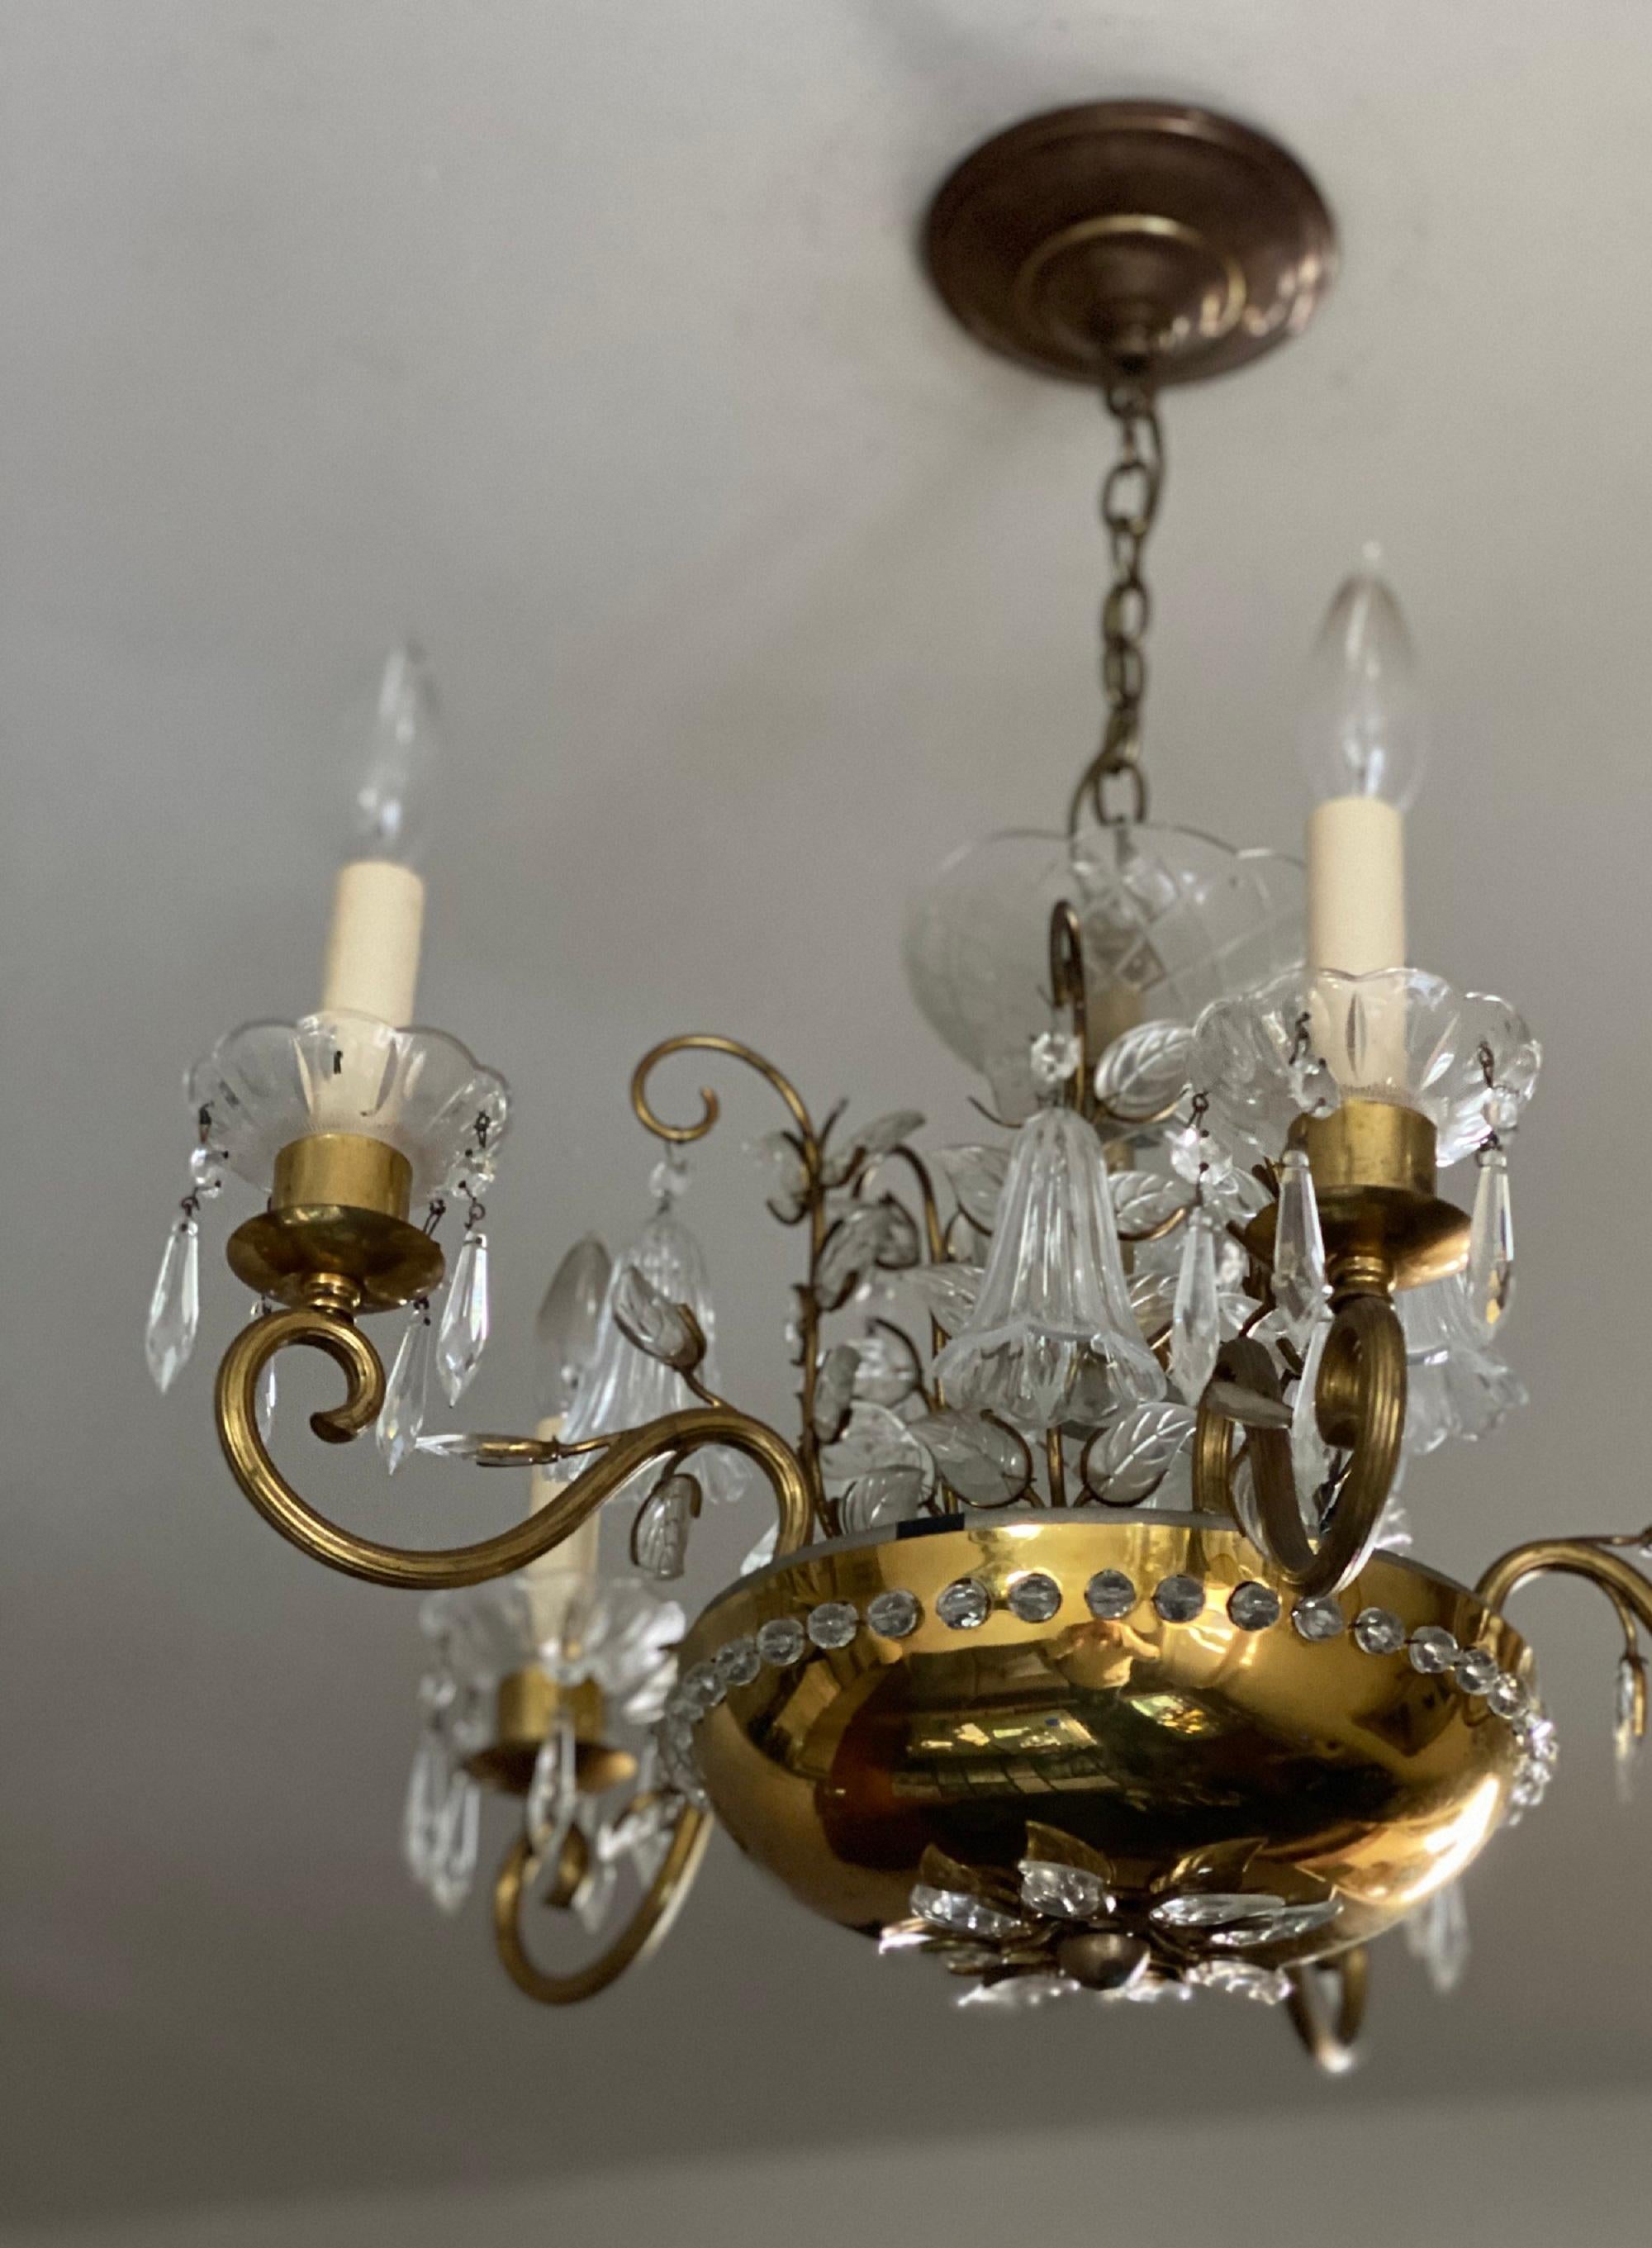 French Provincial 1930s French Maison Baguès Brass Chandelier For Sale